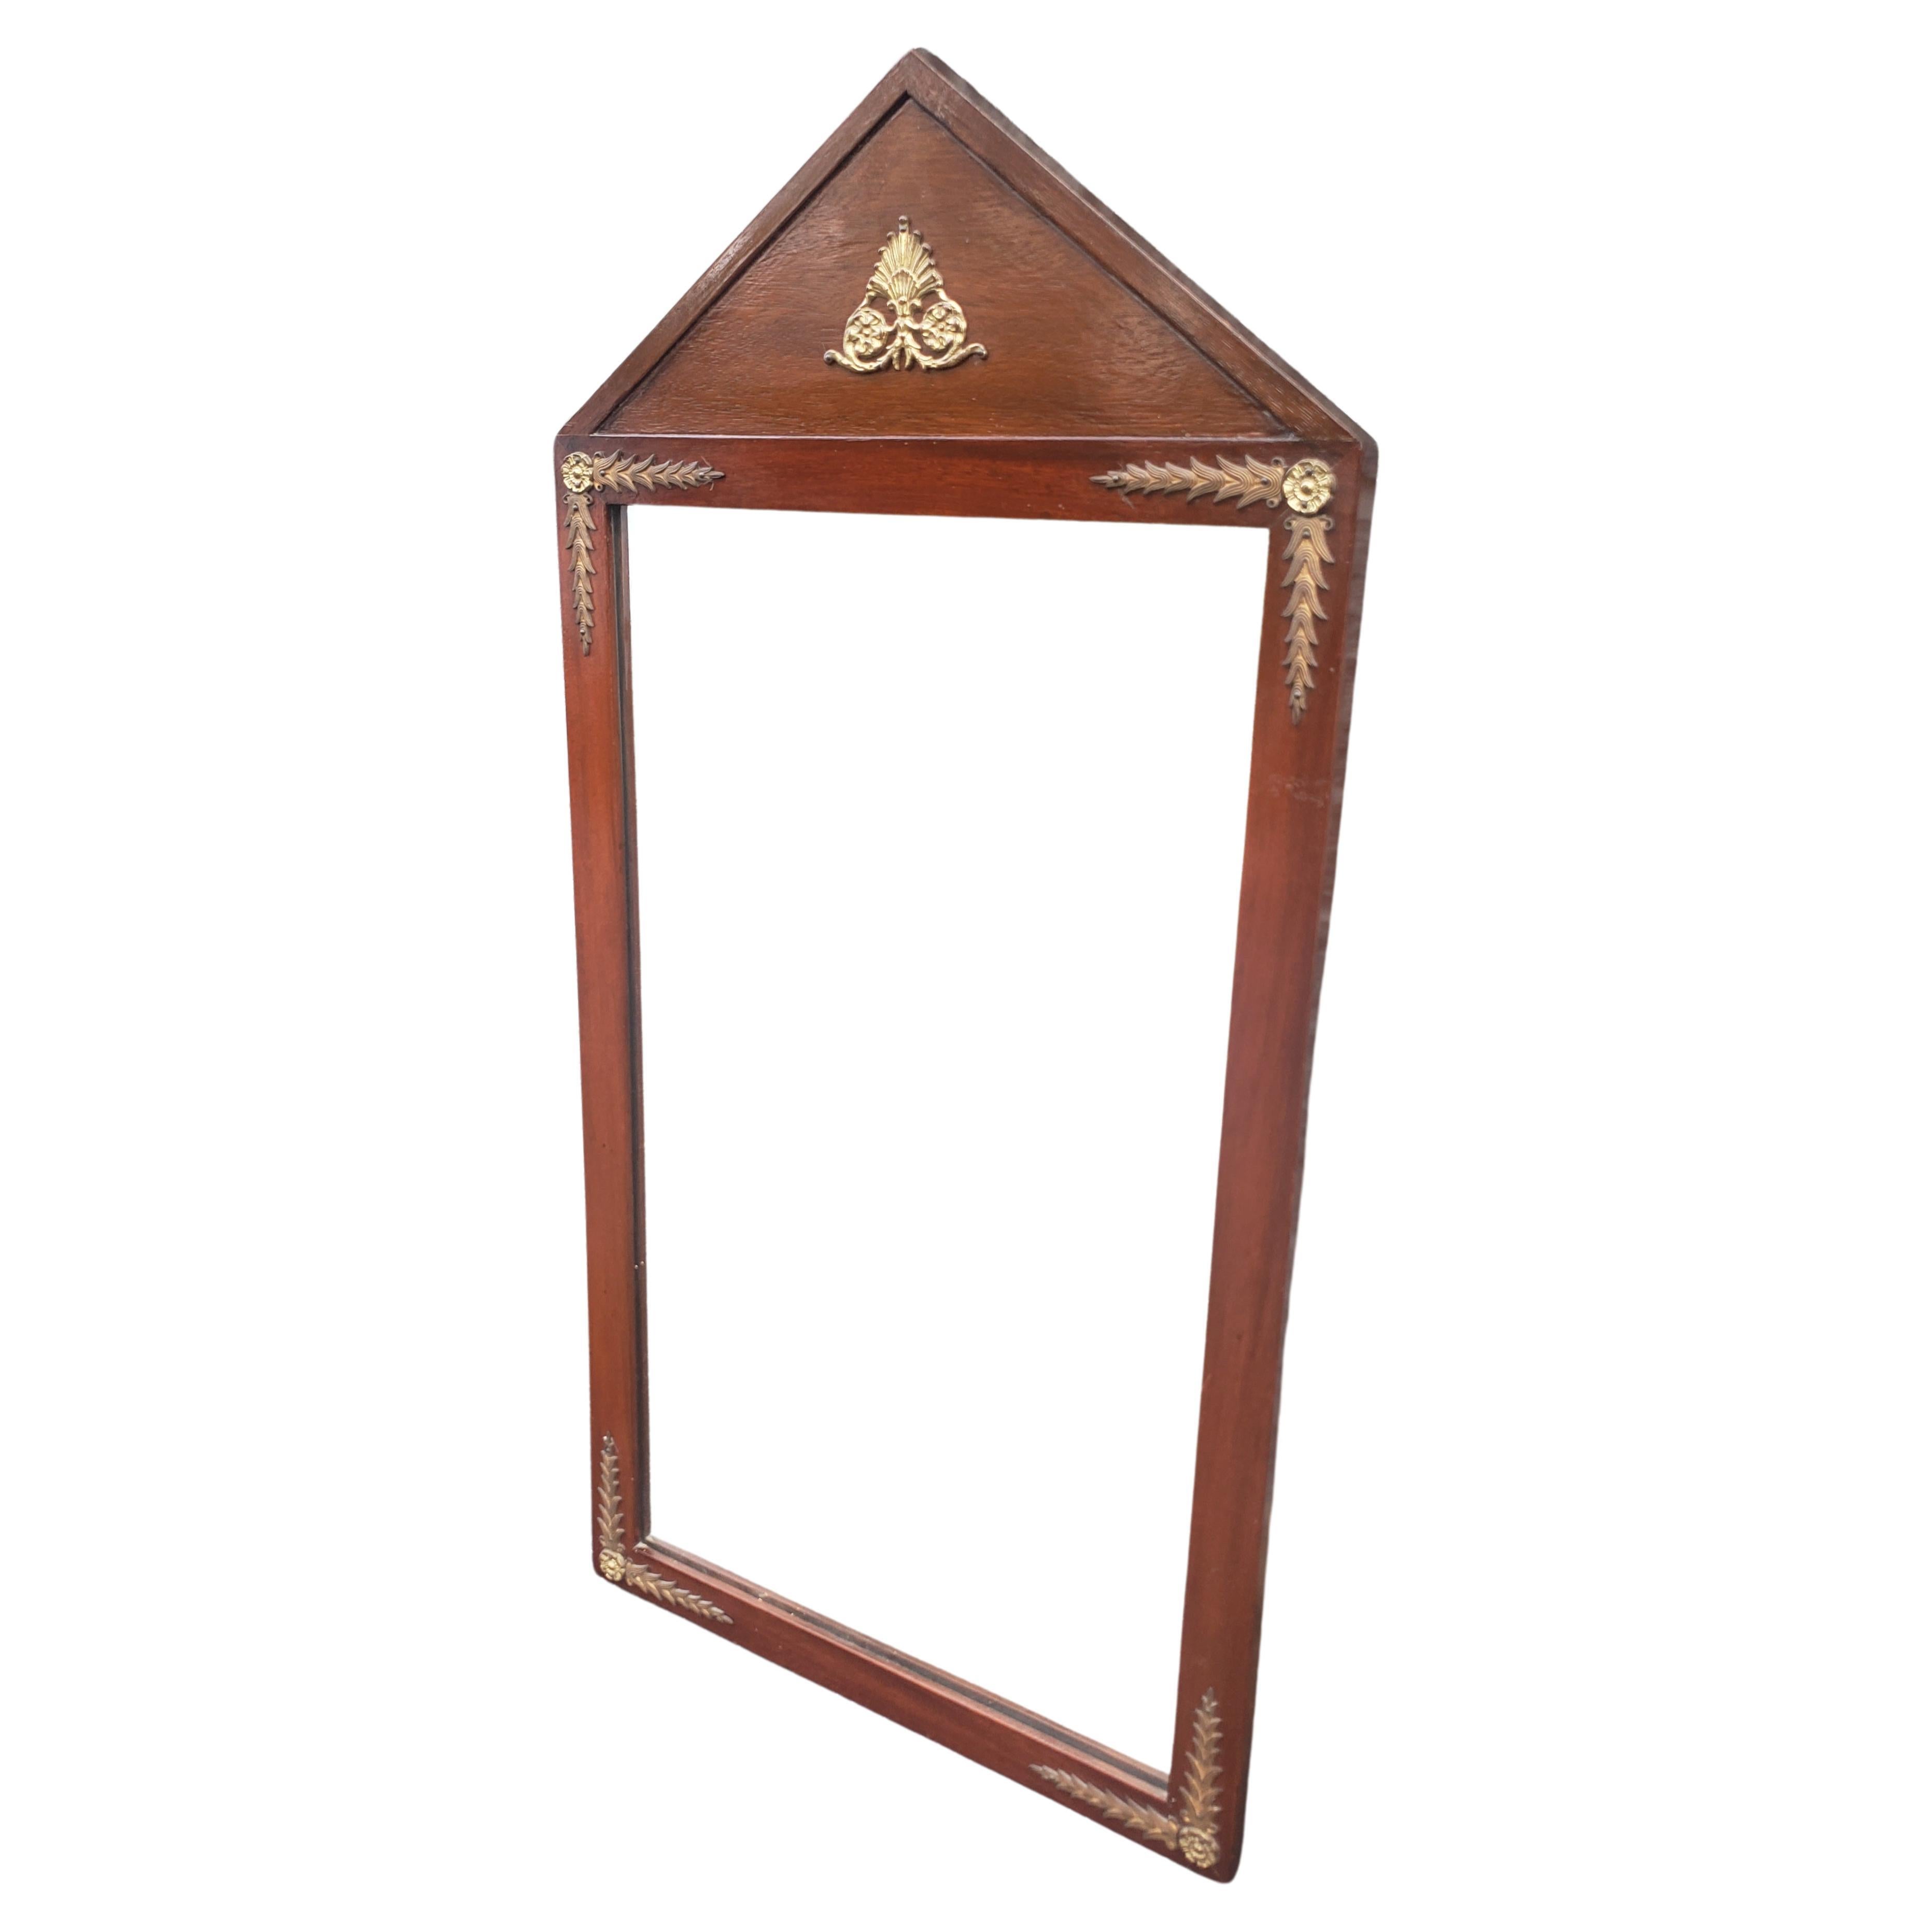 An Early 20th century Empire Neoclassical Brass Mounted and Mahogany Wall Mirror in good condition. Solid Mahogany frame. Measures 18